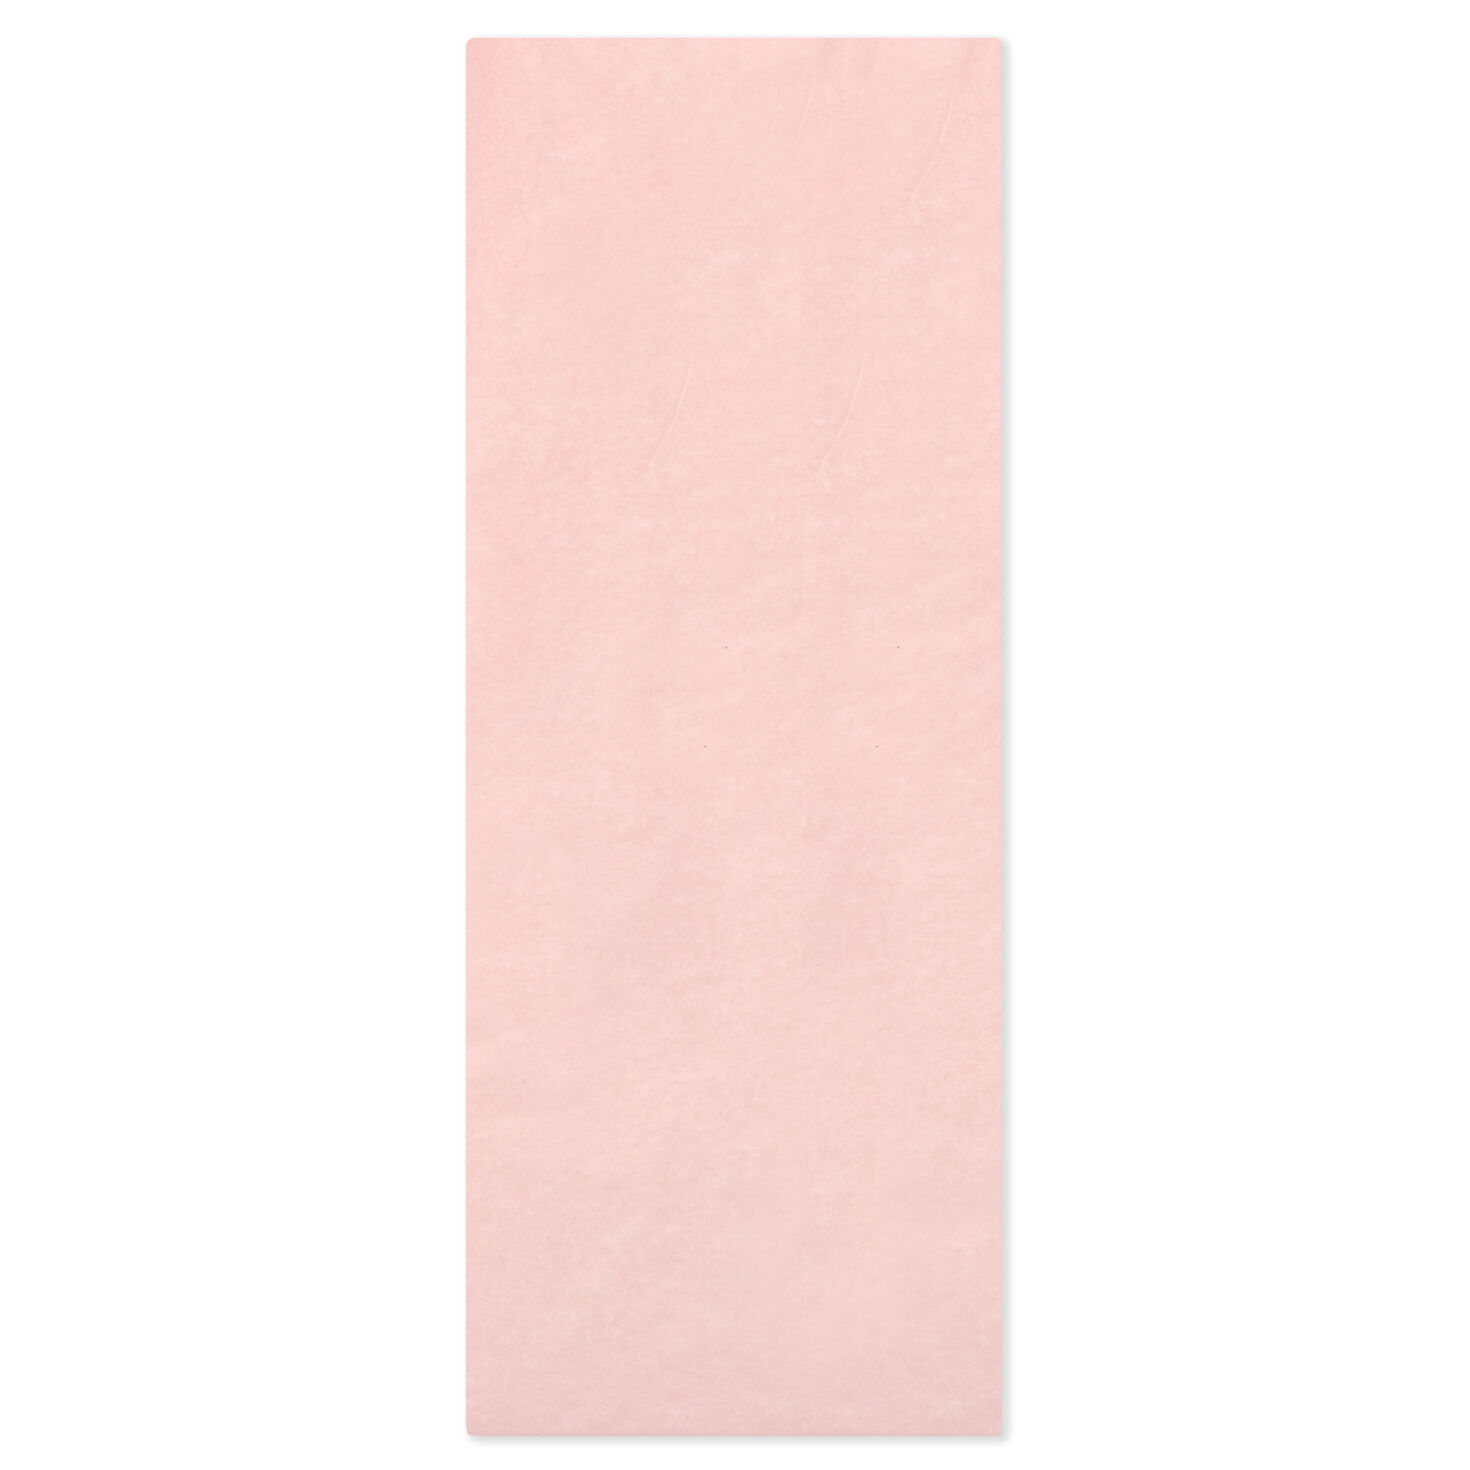 10 Sheets Of  TISSUE PAPER 50 cm x 70 cm approx HOT PINK 